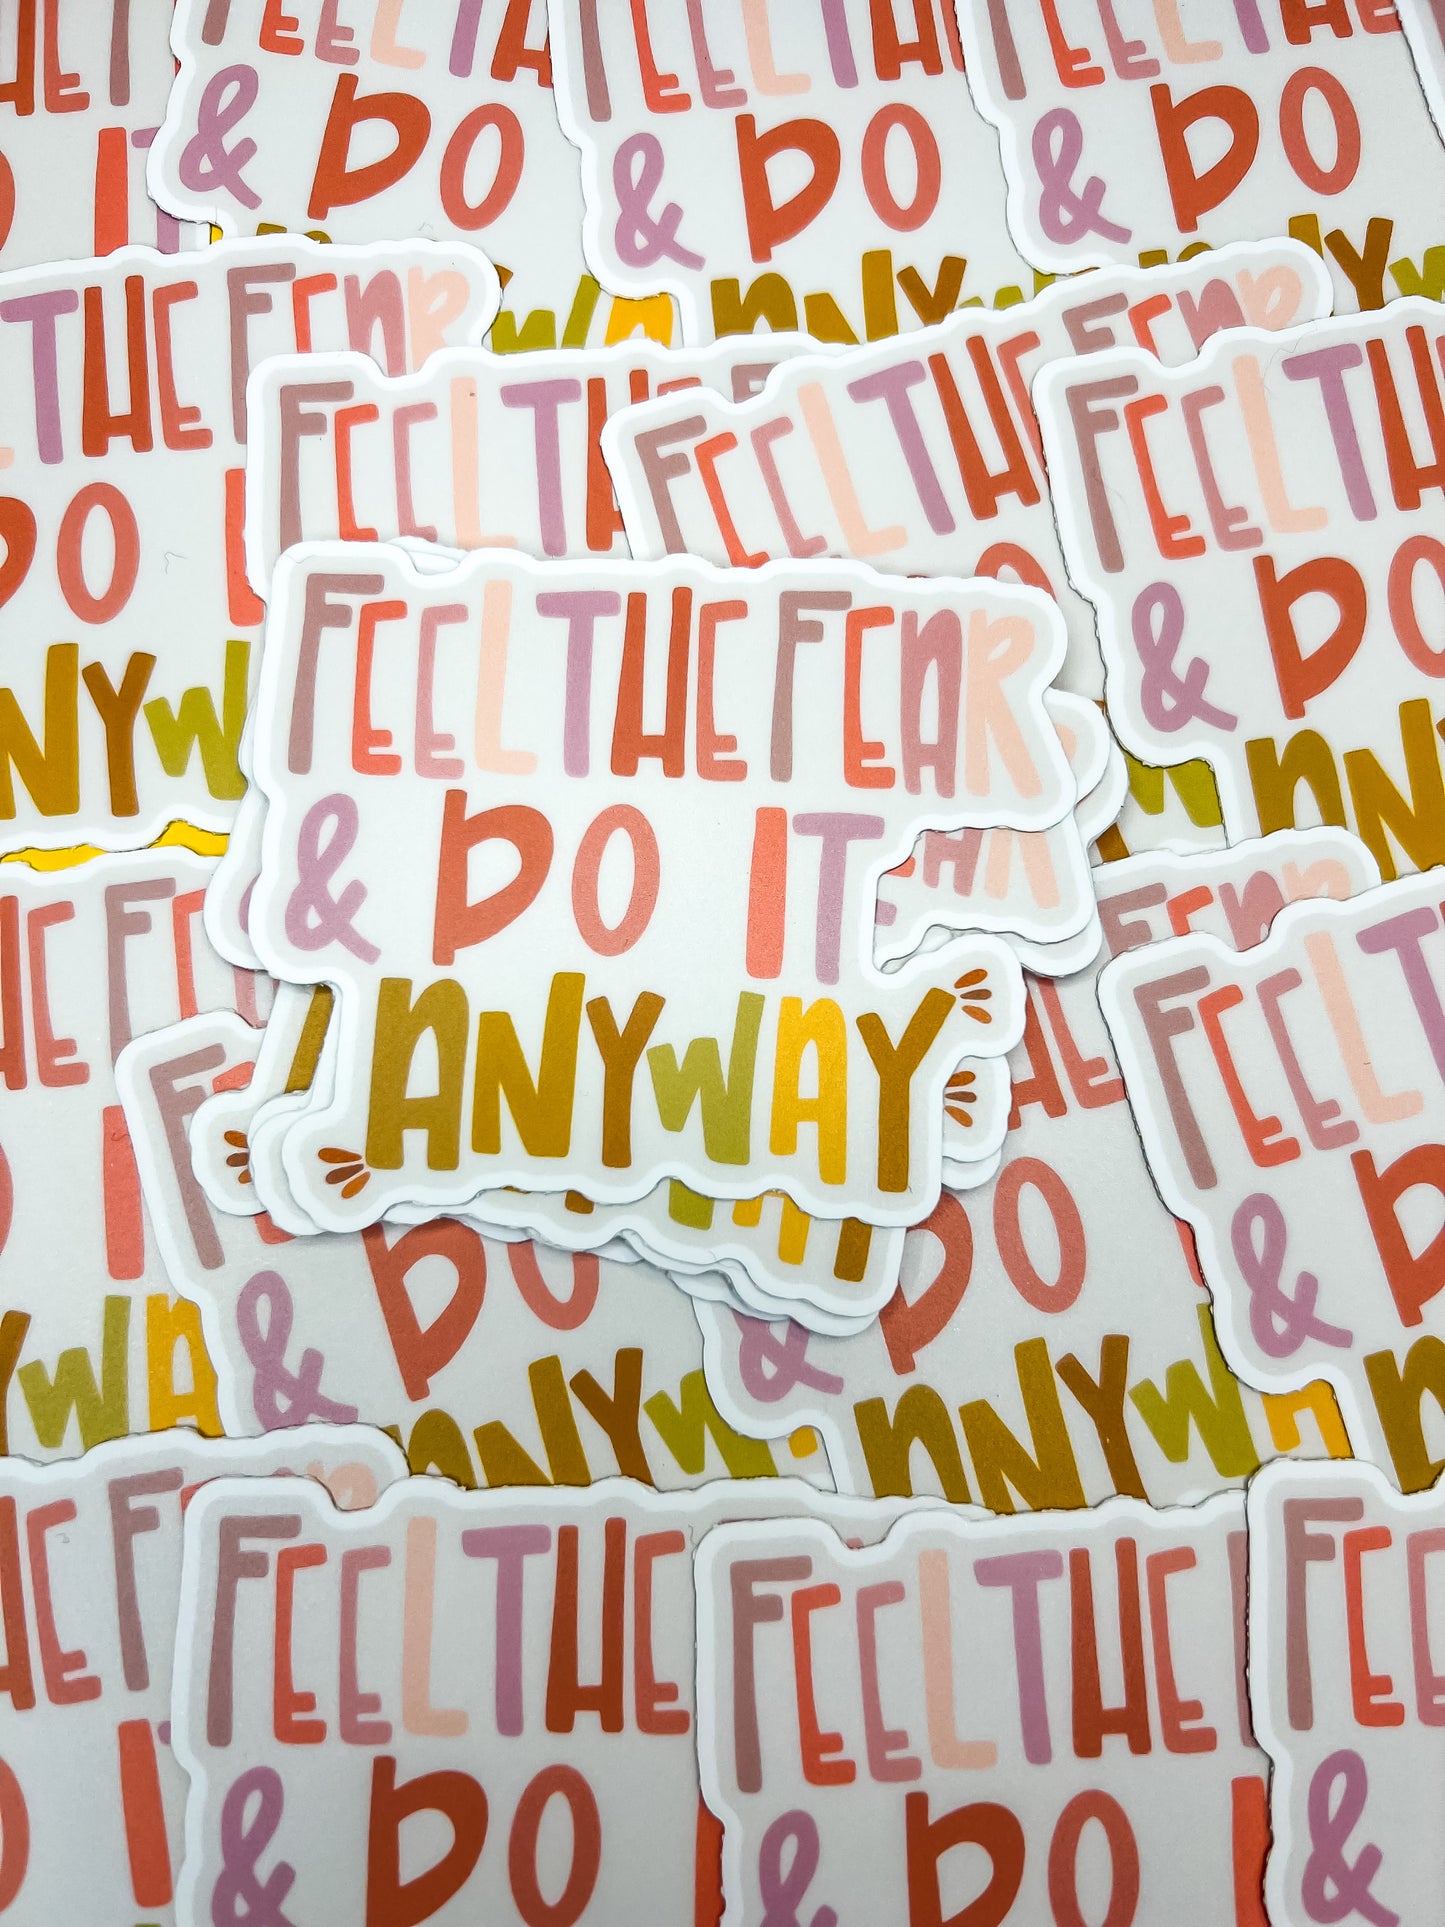 Feel the fear and do it anyway sticker!